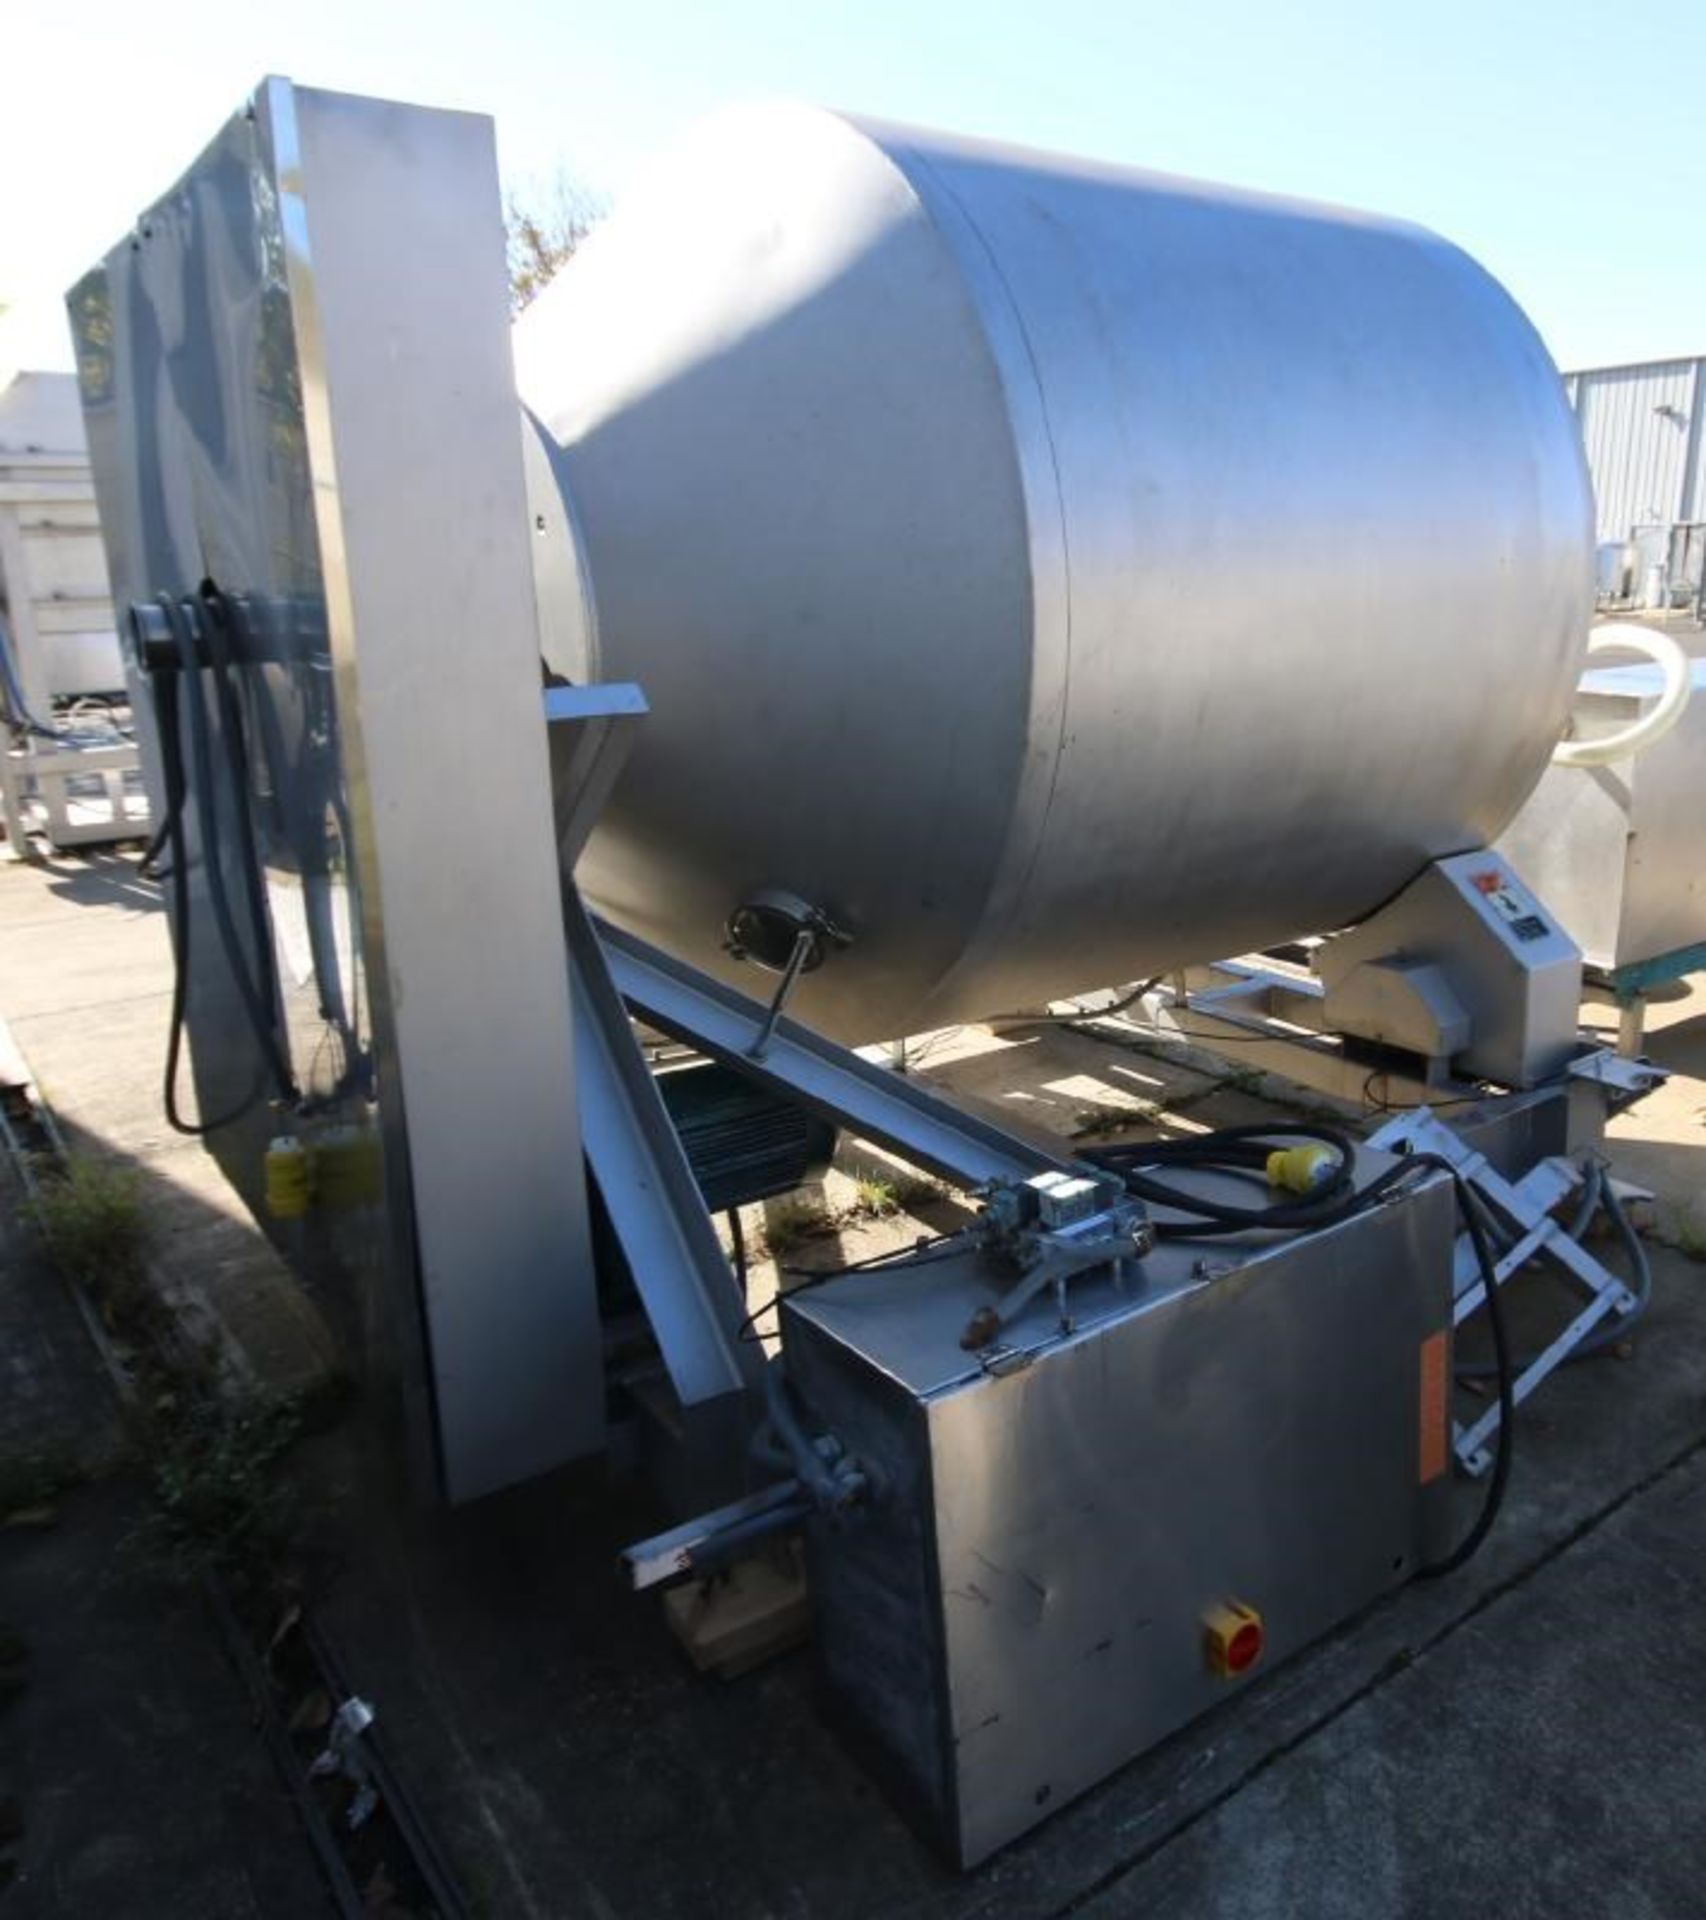 Blentech S/S Vacuum Tumbler, Model VT1-3000-S, S/N 970676 with Aprox. 8 ft. L x 67" W Tunnel - Image 7 of 13